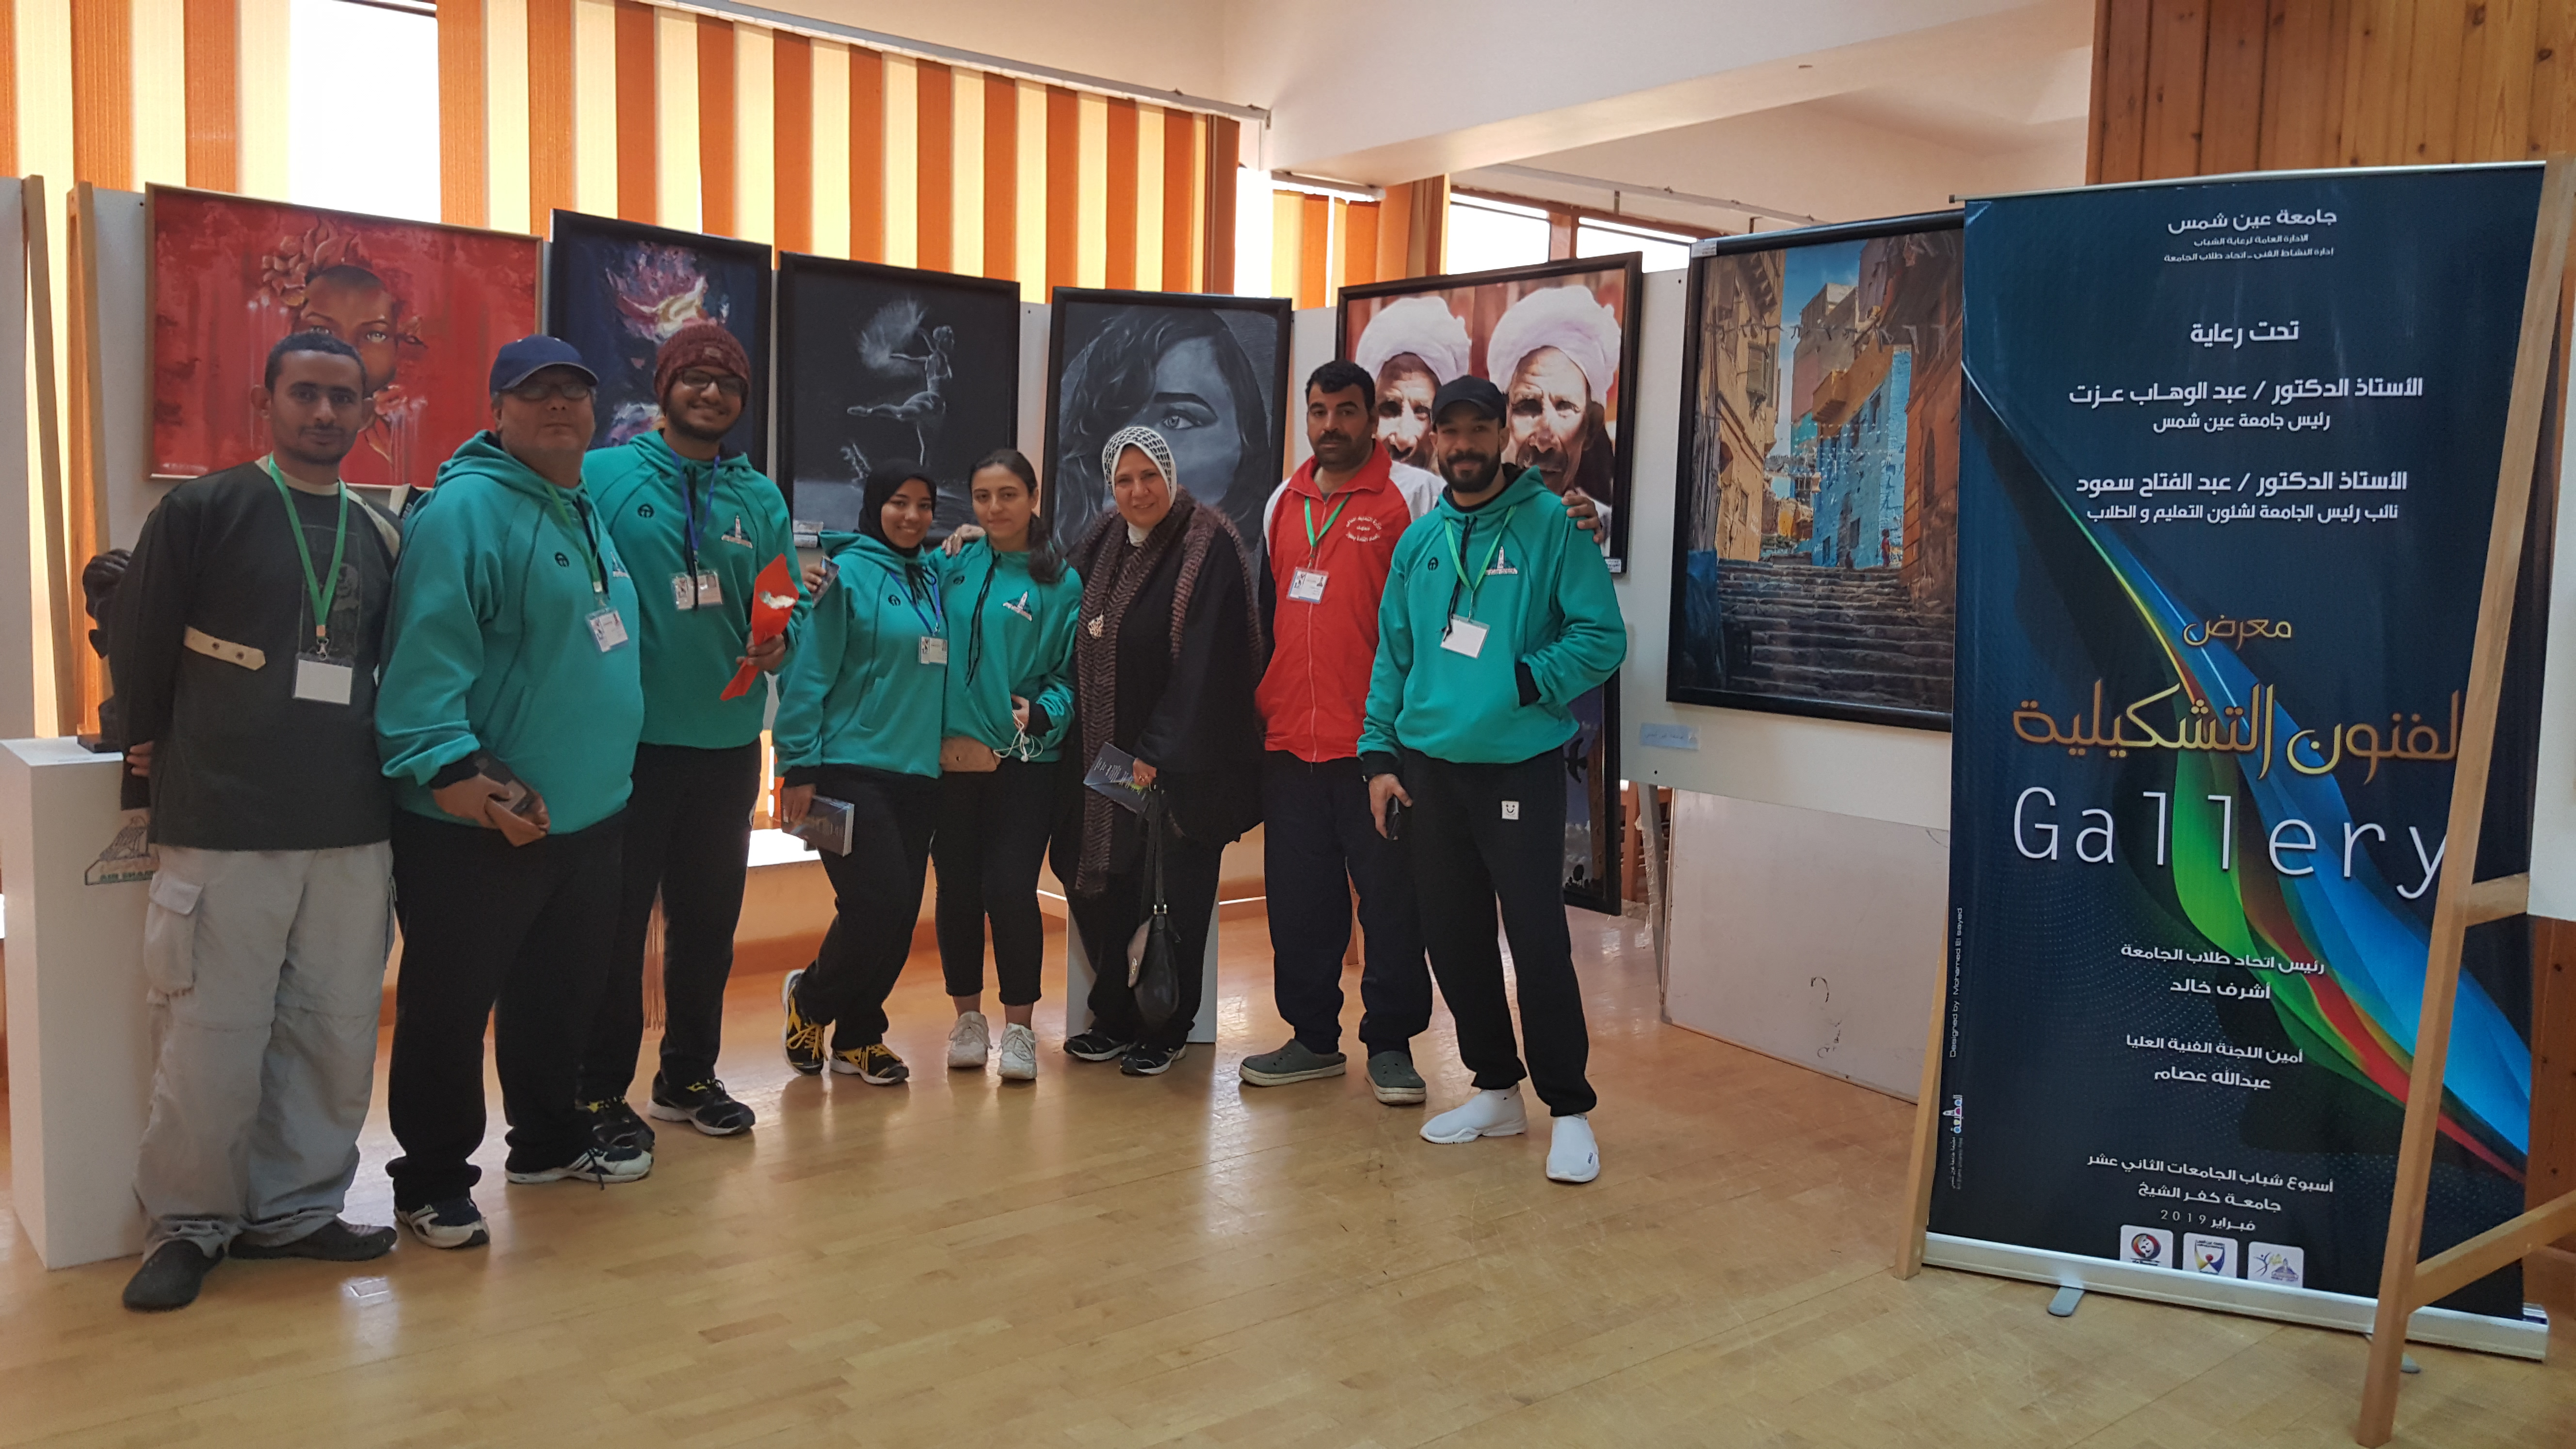 Ain Shams University won the third-place in the plastic arts competition for non-specialists in photography